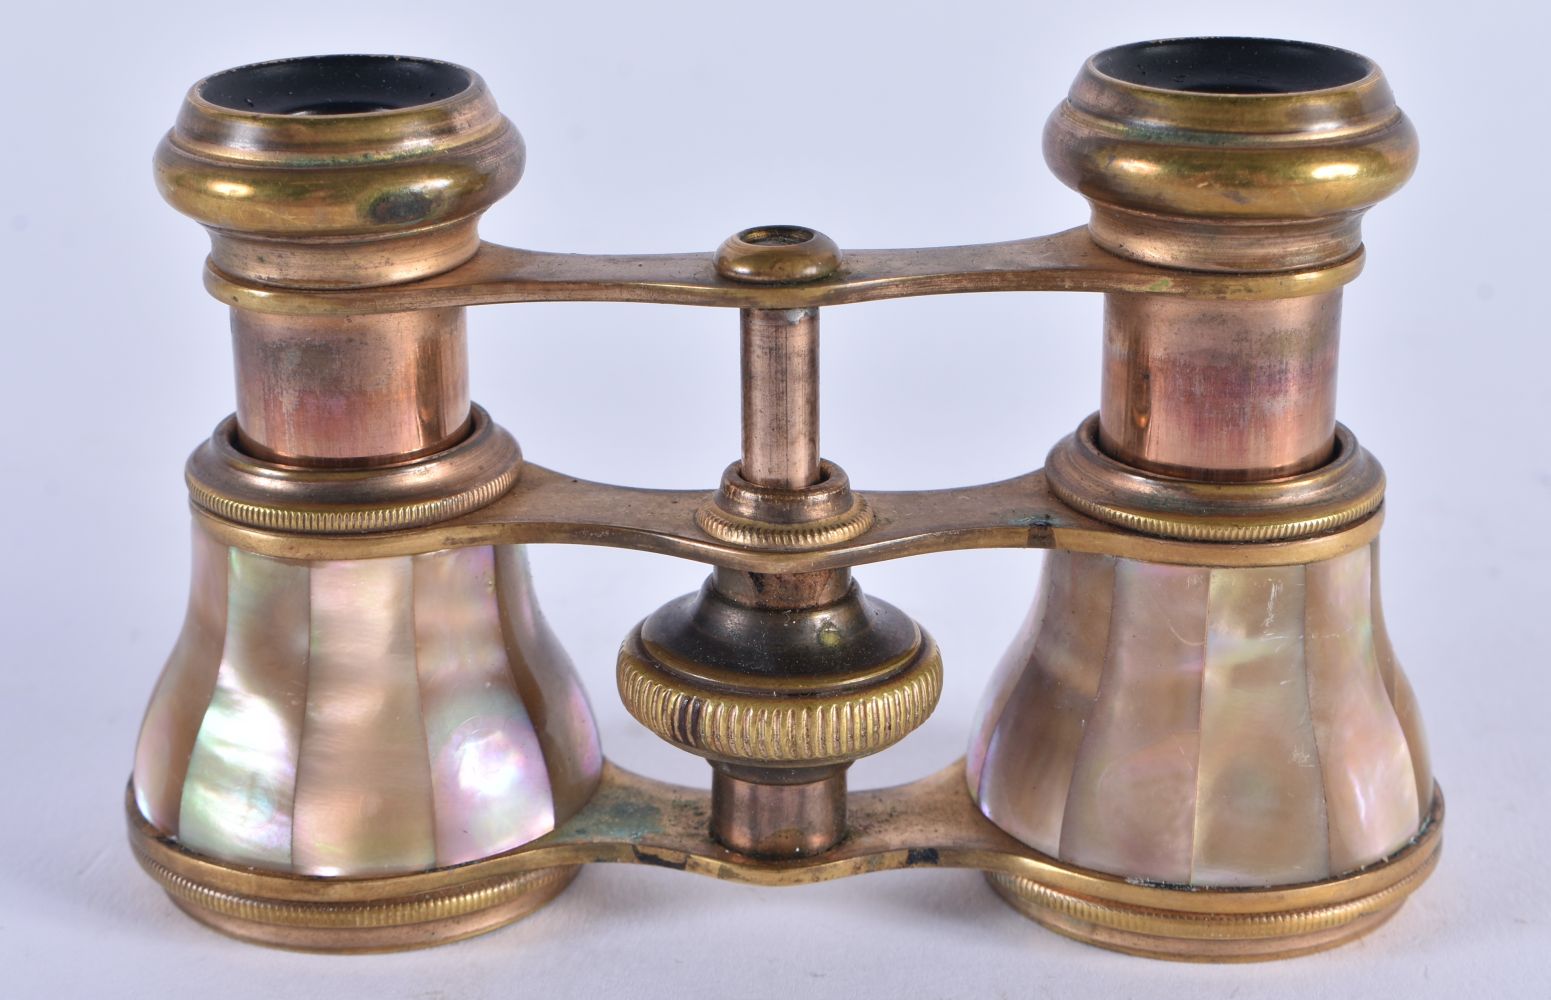 A PAIR OF MOTHER OF PEARL OPERA GLASSES. 9 cm x 6 cm. - Image 2 of 4